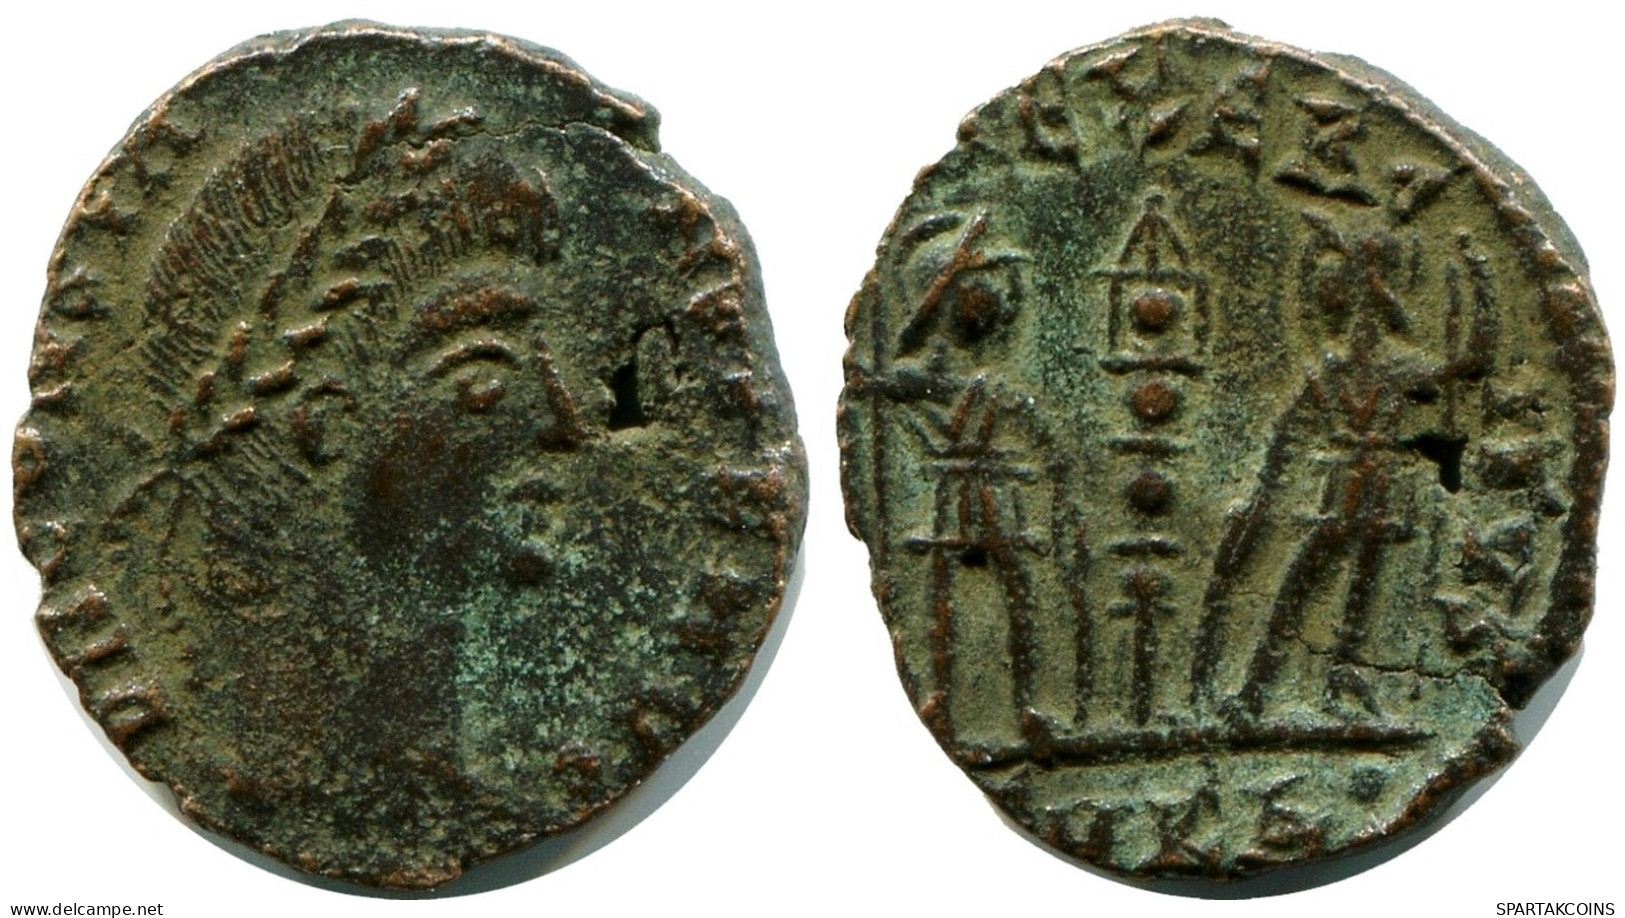 CONSTANS MINTED IN CYZICUS FOUND IN IHNASYAH HOARD EGYPT #ANC11660.14.U.A - The Christian Empire (307 AD Tot 363 AD)